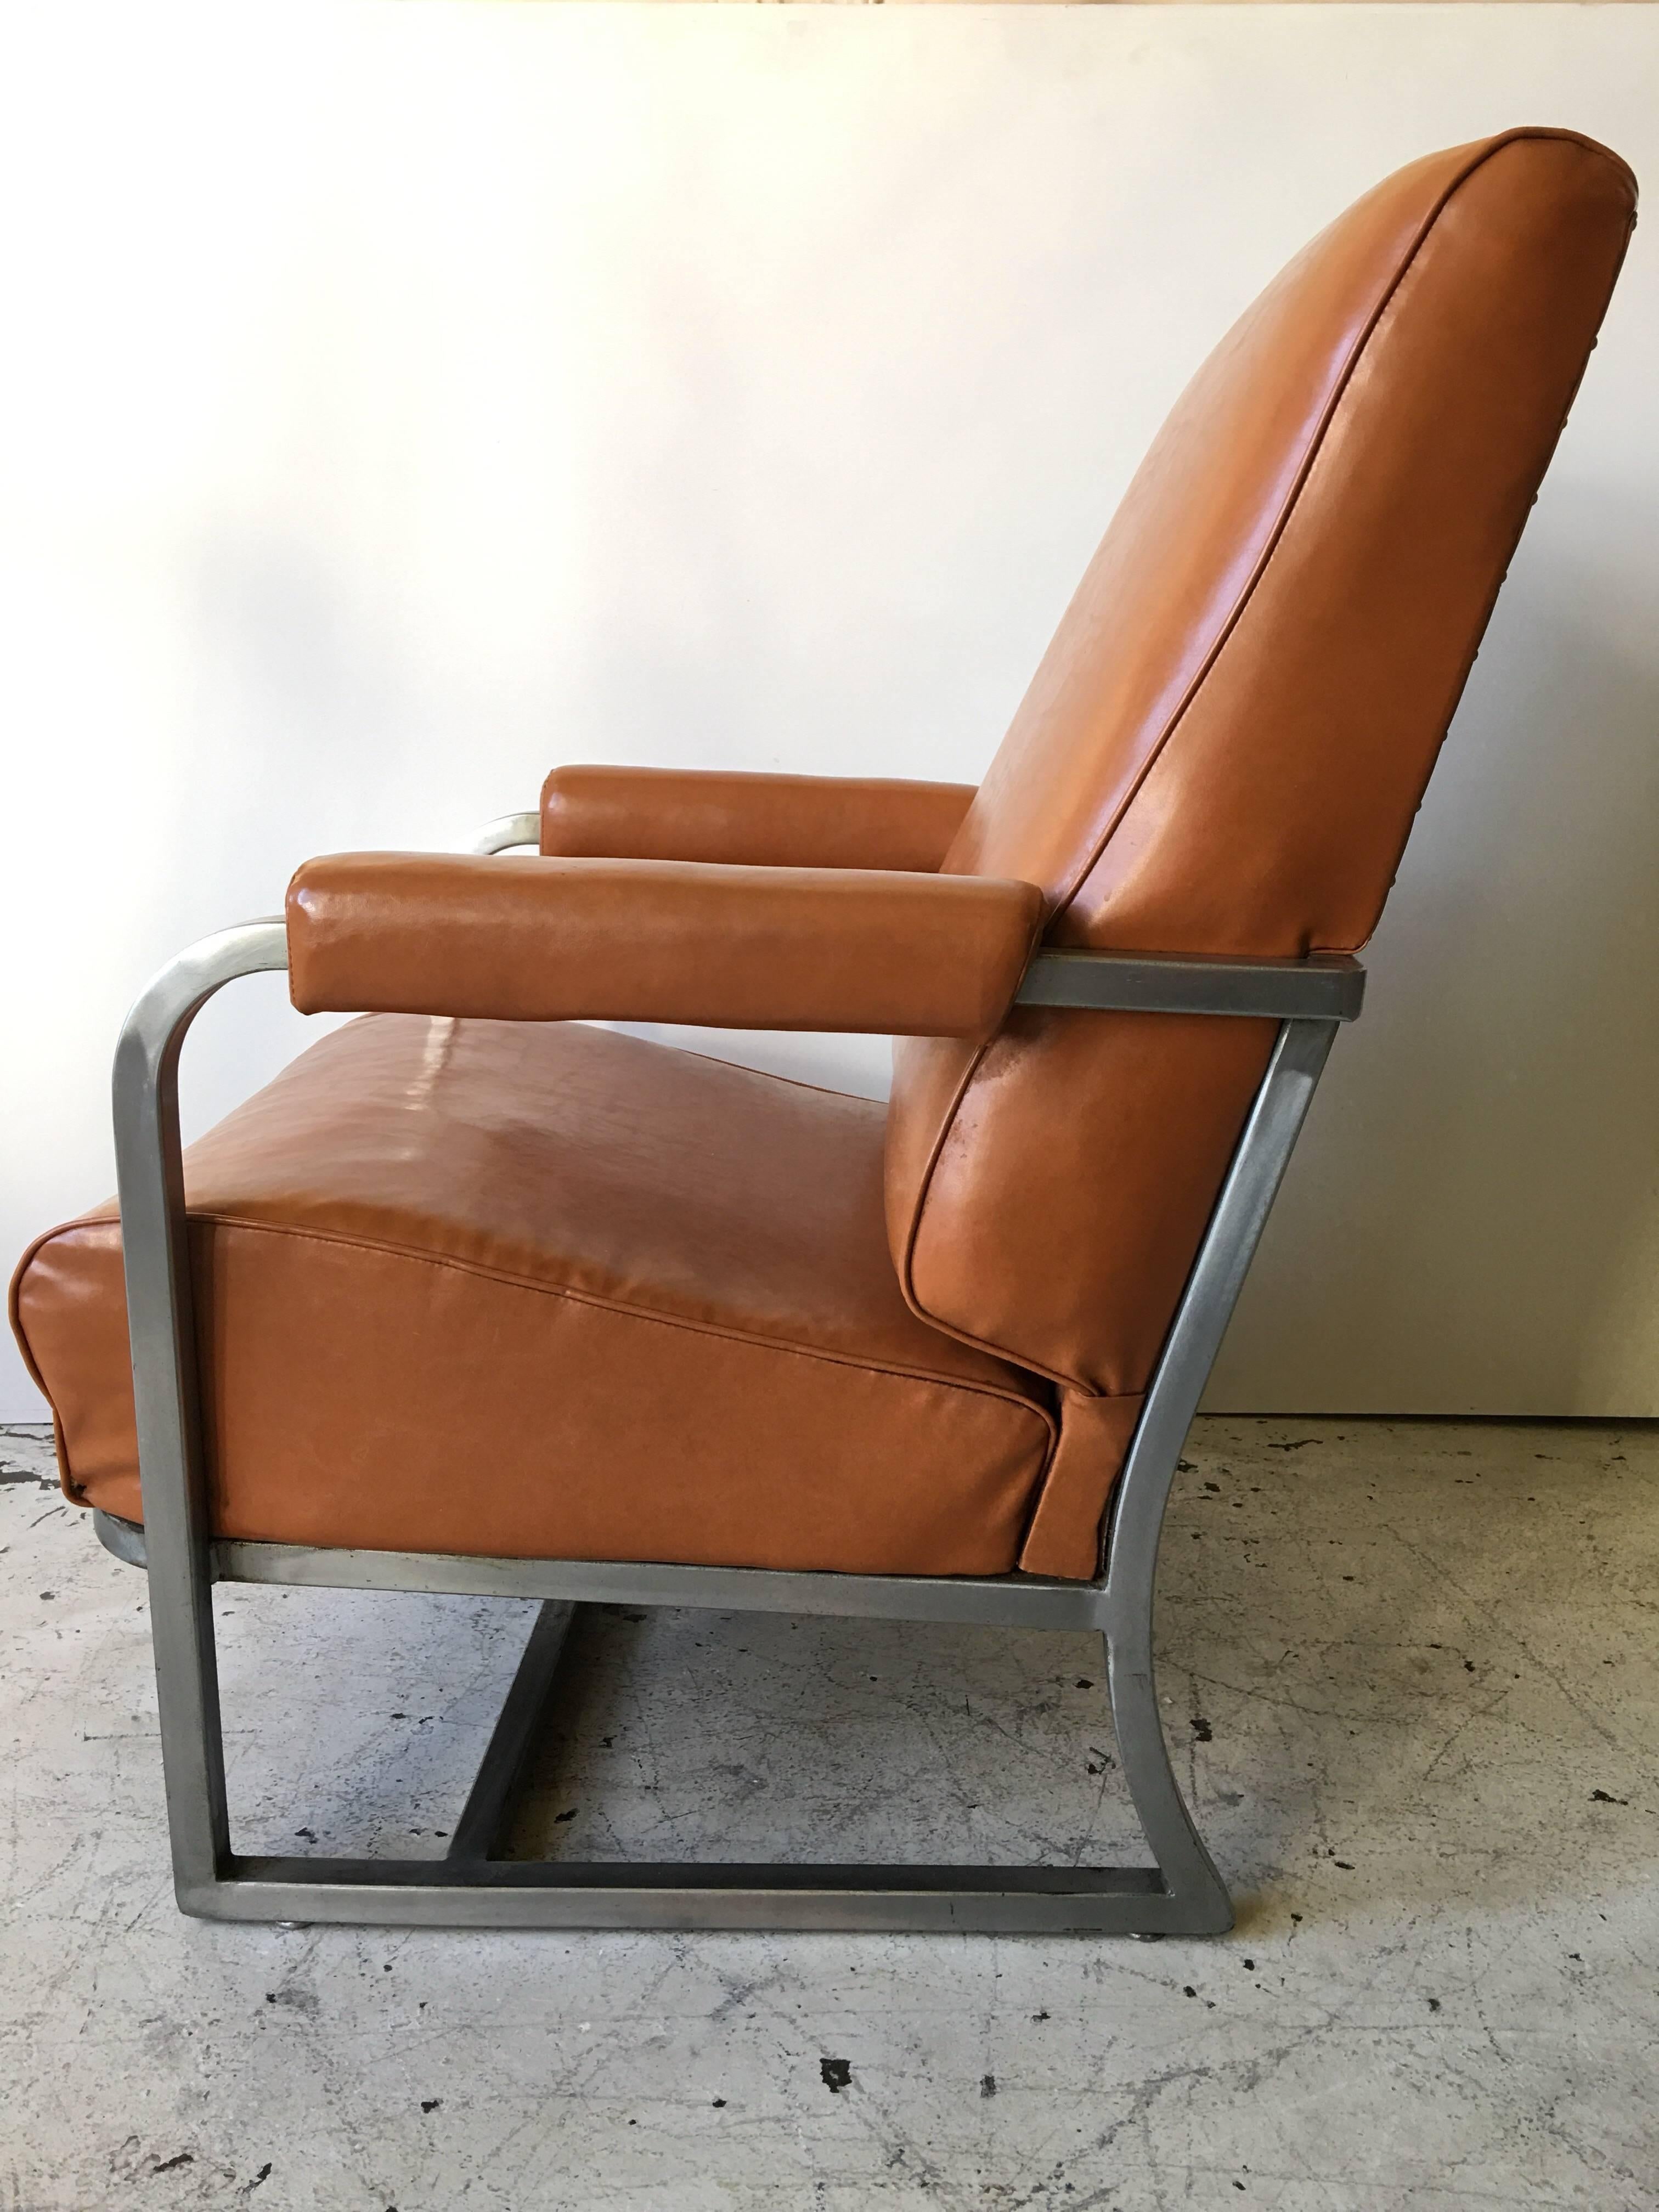 Mid-20th Century Deco Henry Dreyfuss Lounge Chair For Sale